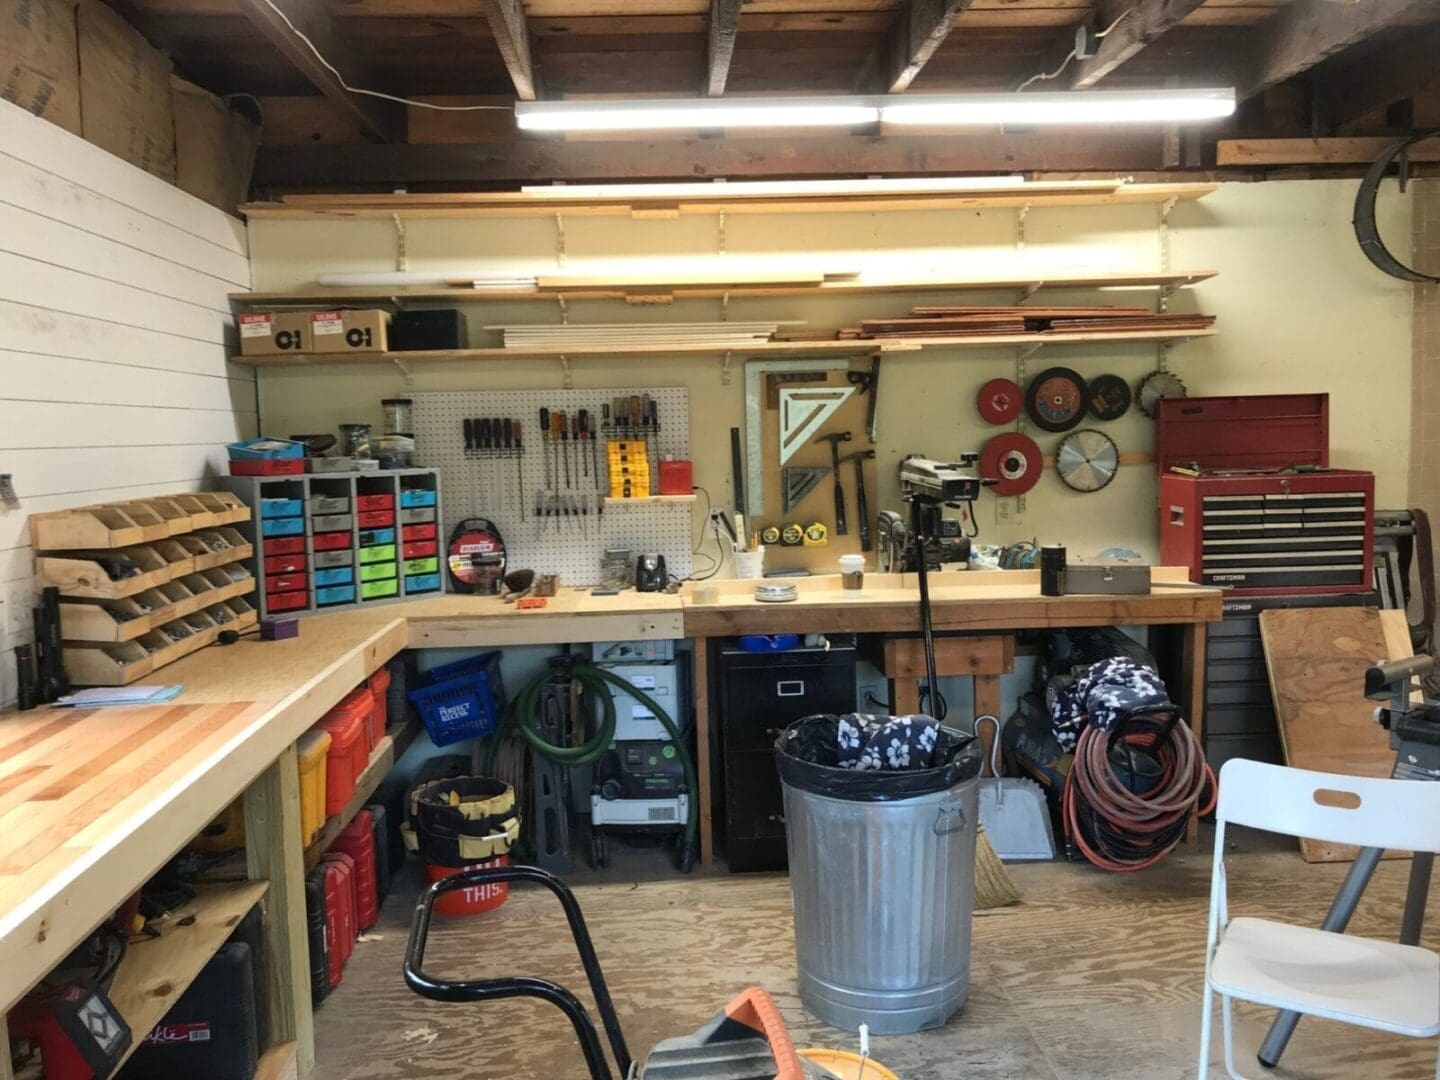 A workshop with a lot of tools and equipment.